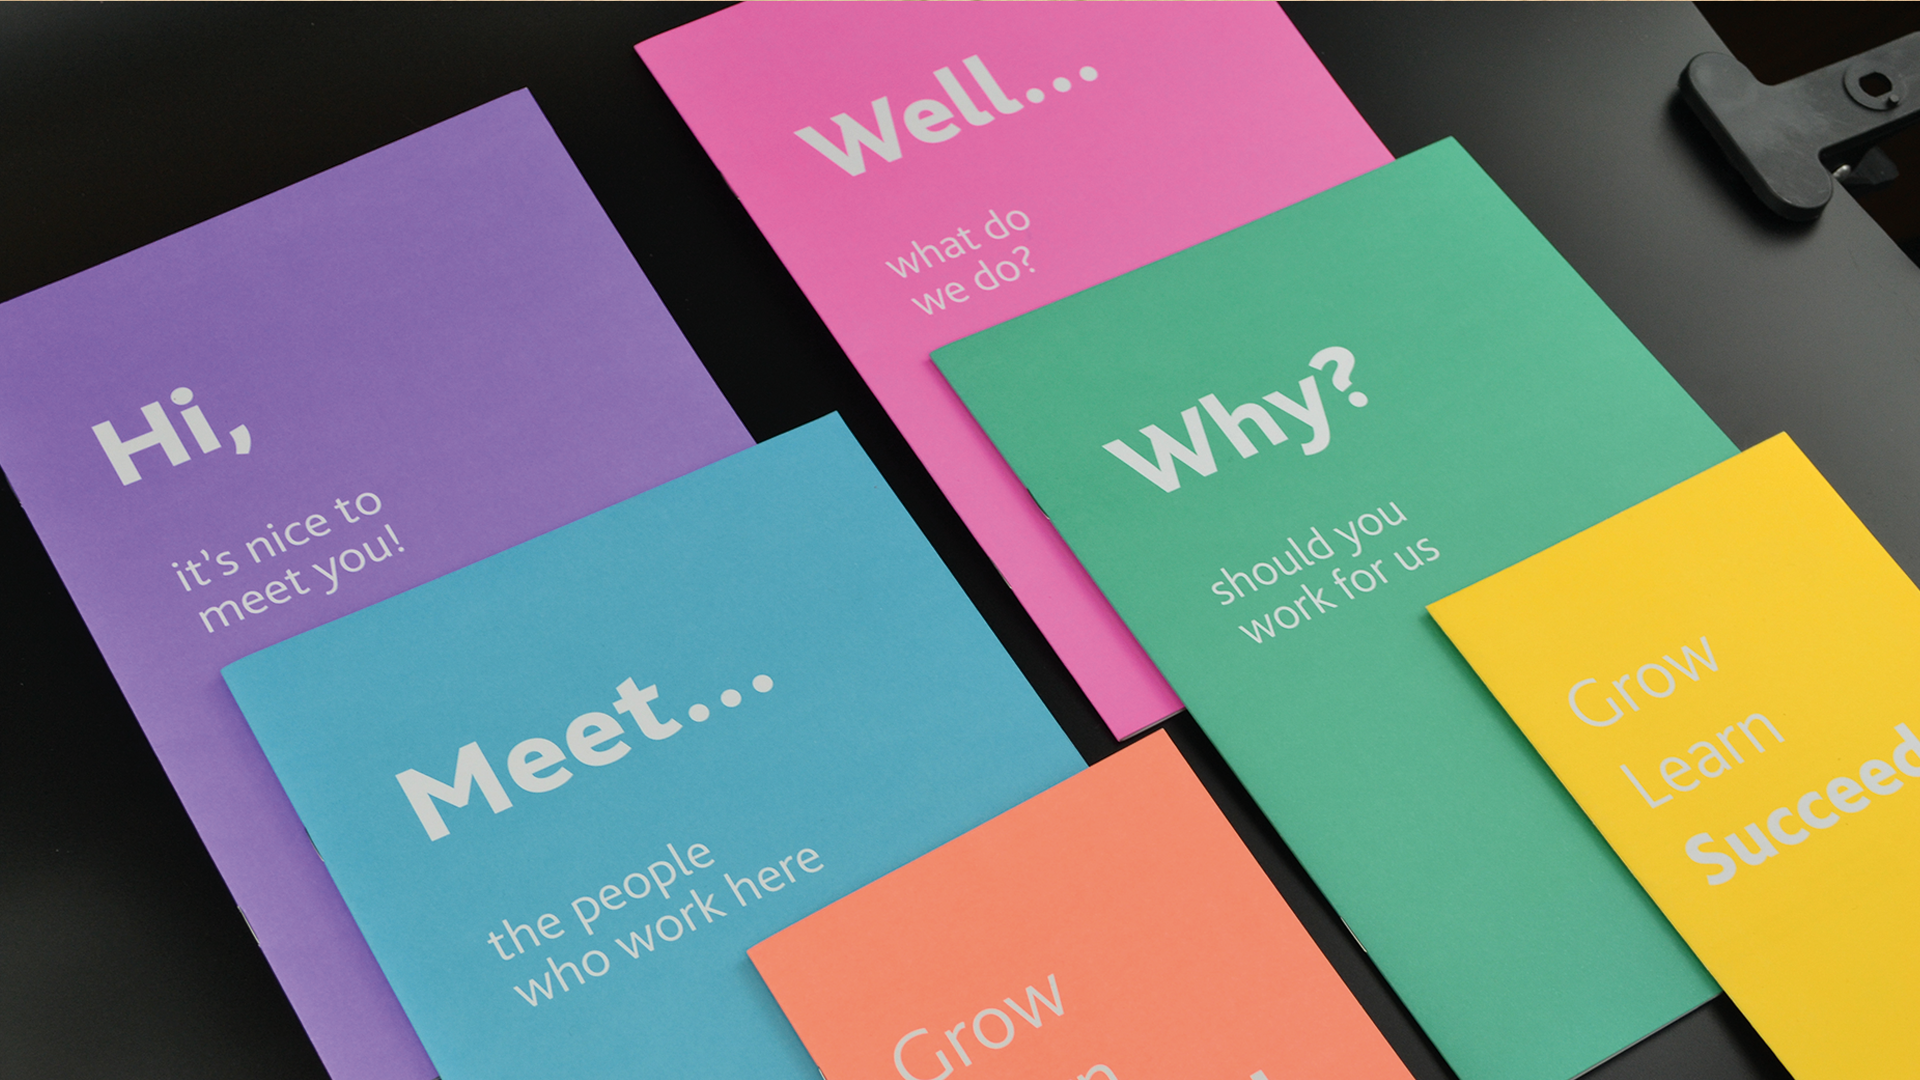 Printed marketing materials for recruitment by Gillian Heron